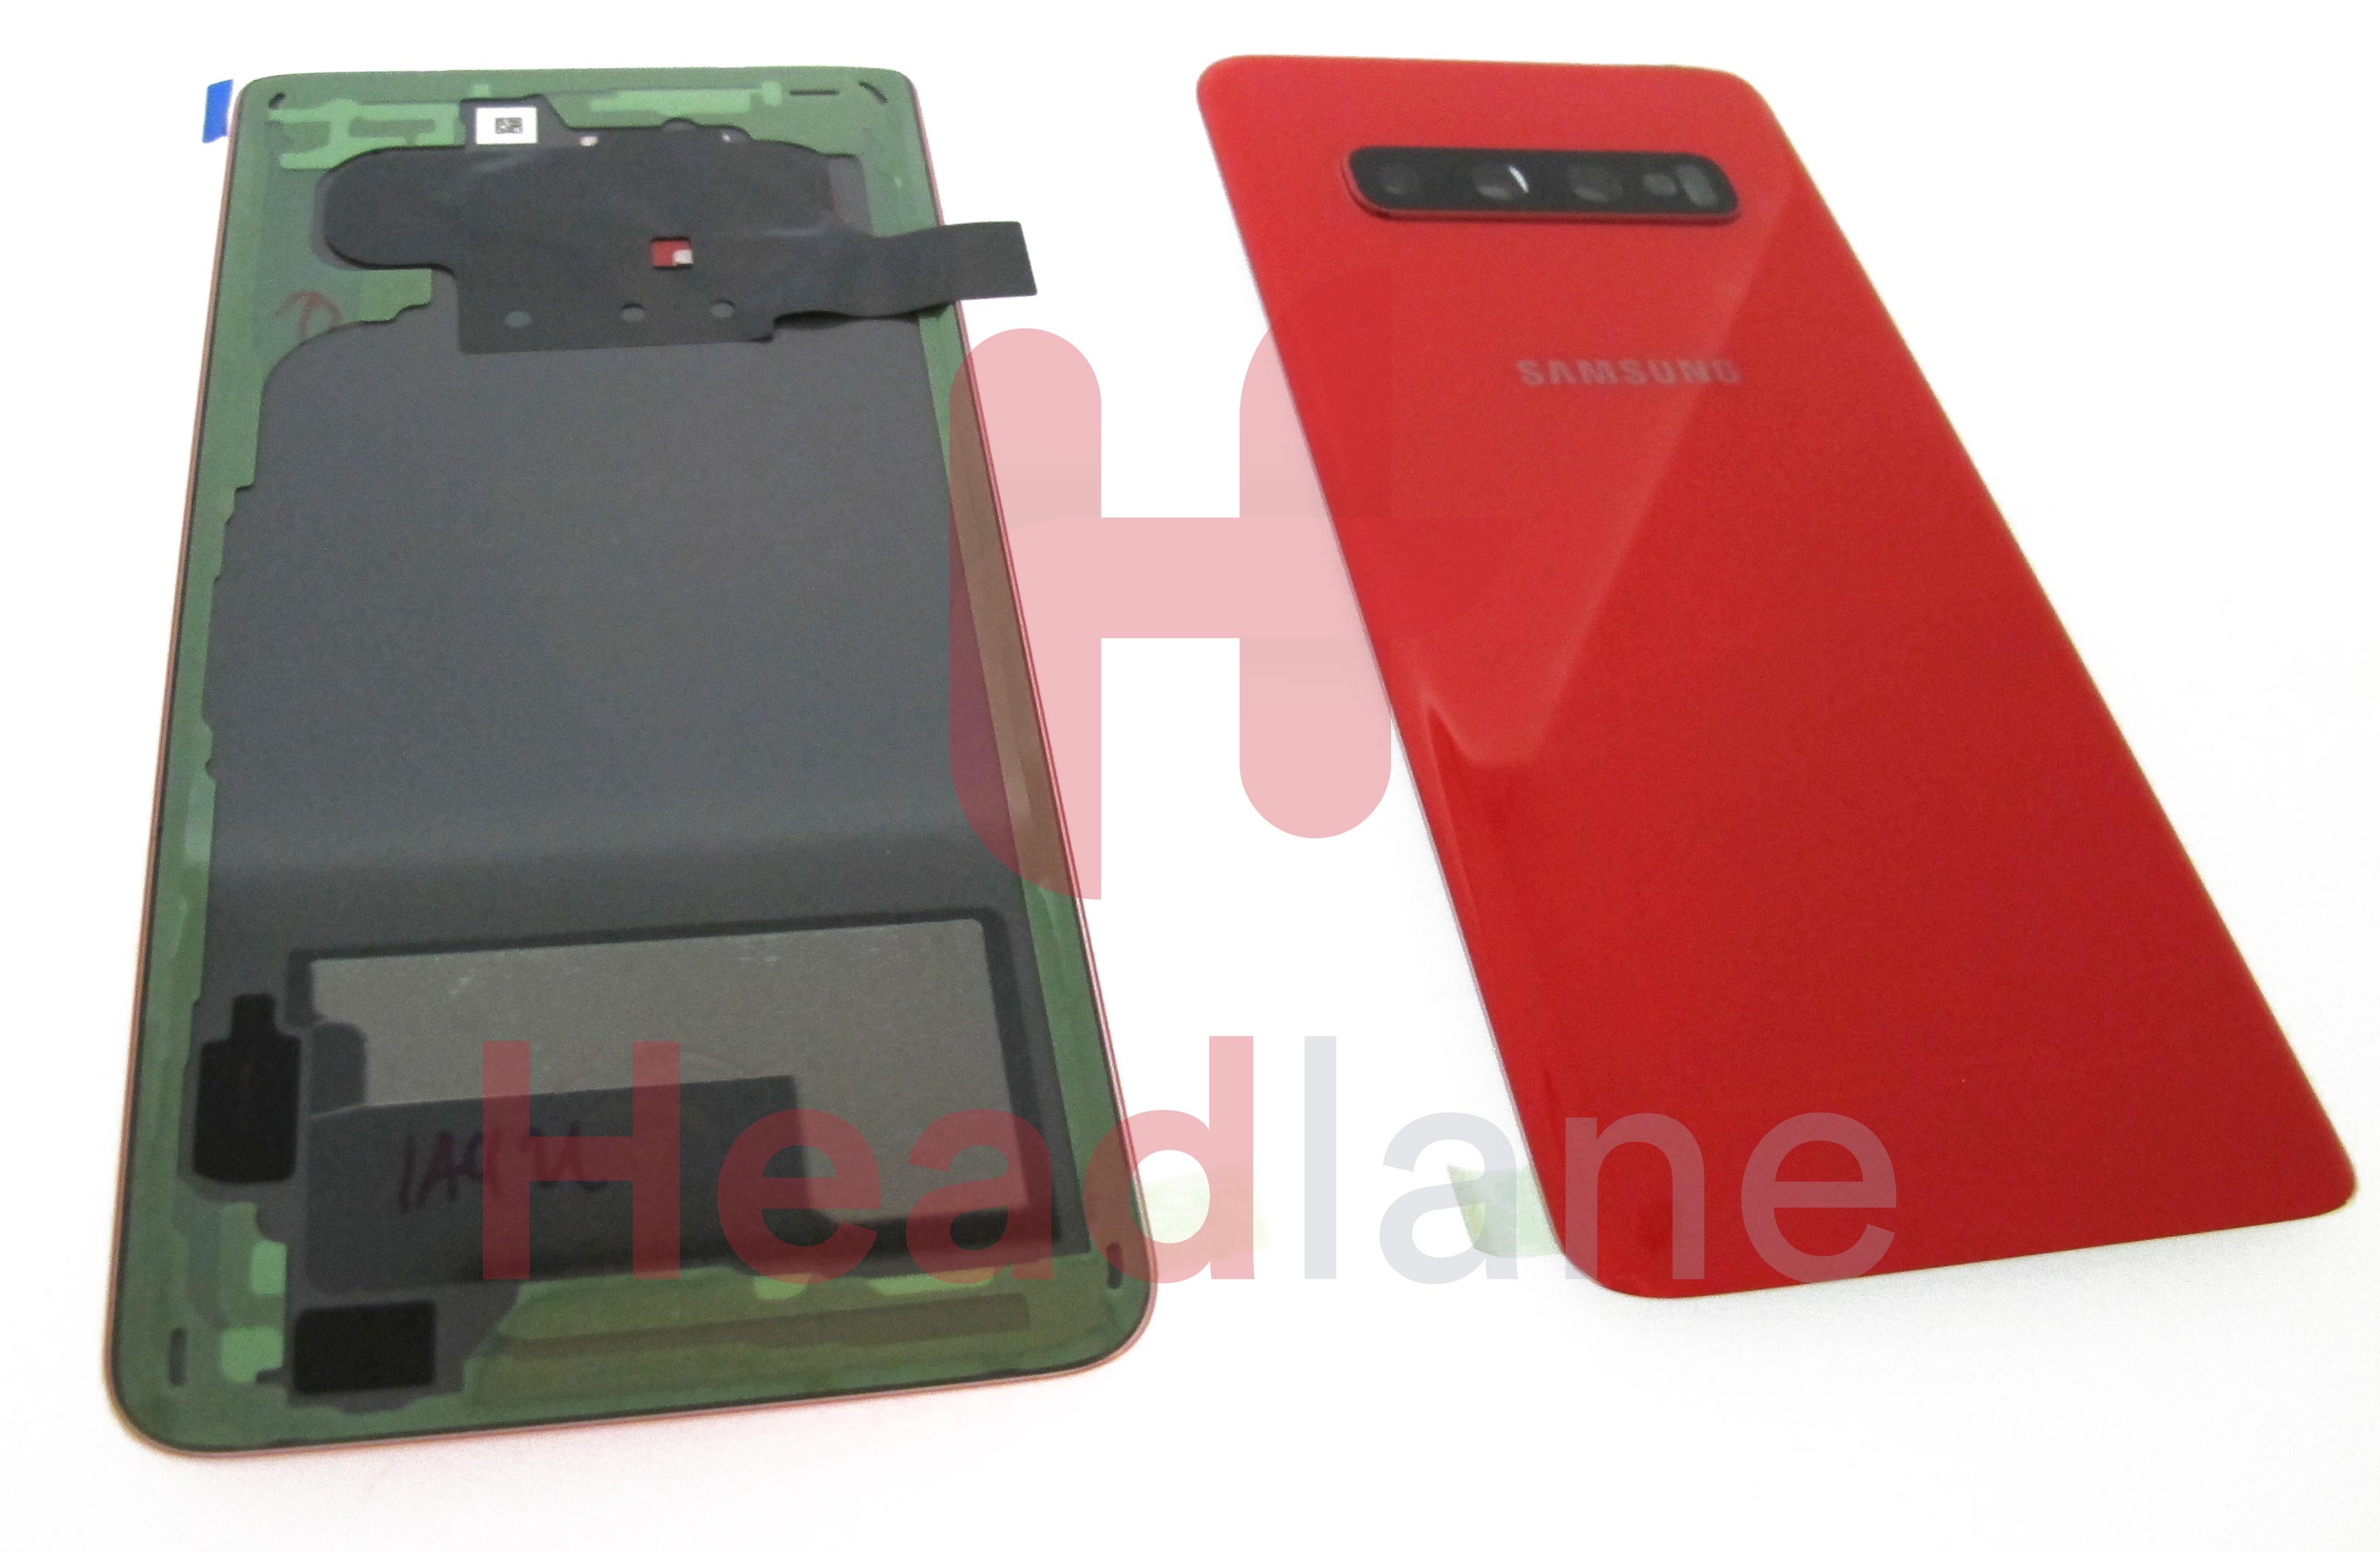 Samsung SM-G973 Galaxy S10 Back / Battery Cover - Cardinal Red